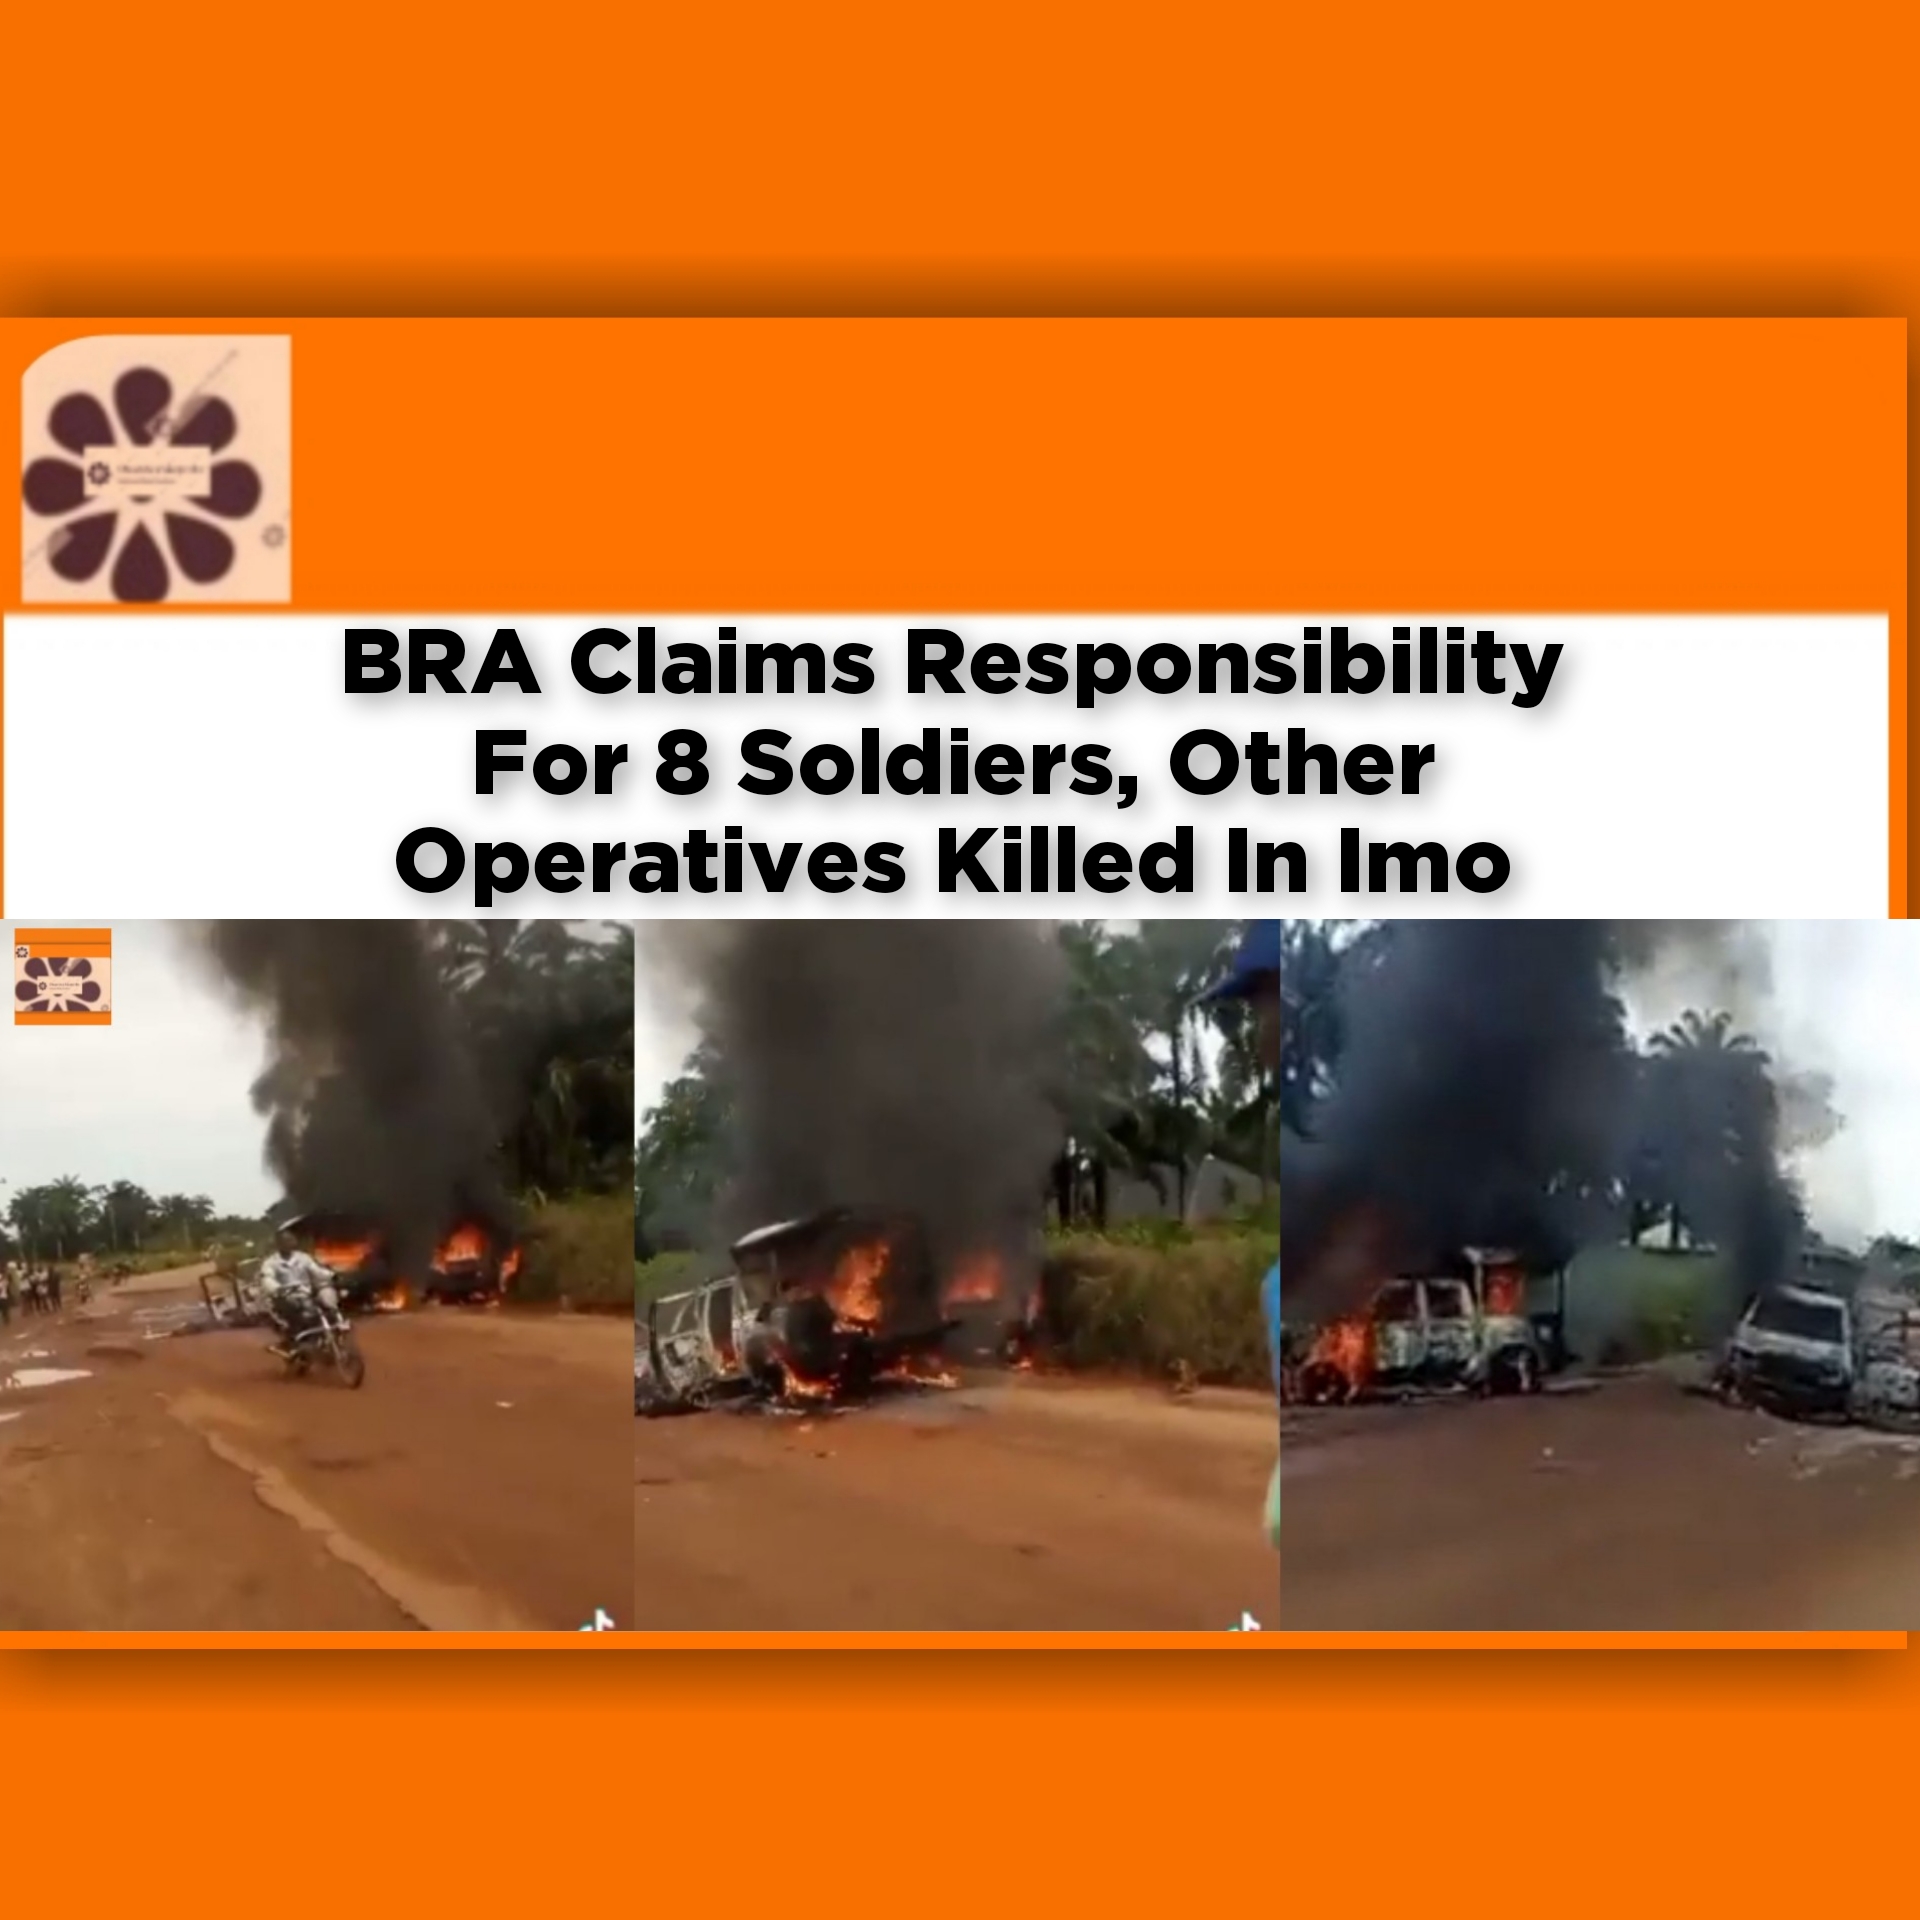 BRA Claims Responsibility For 8 Soldiers, Other Operatives Killed In Imo